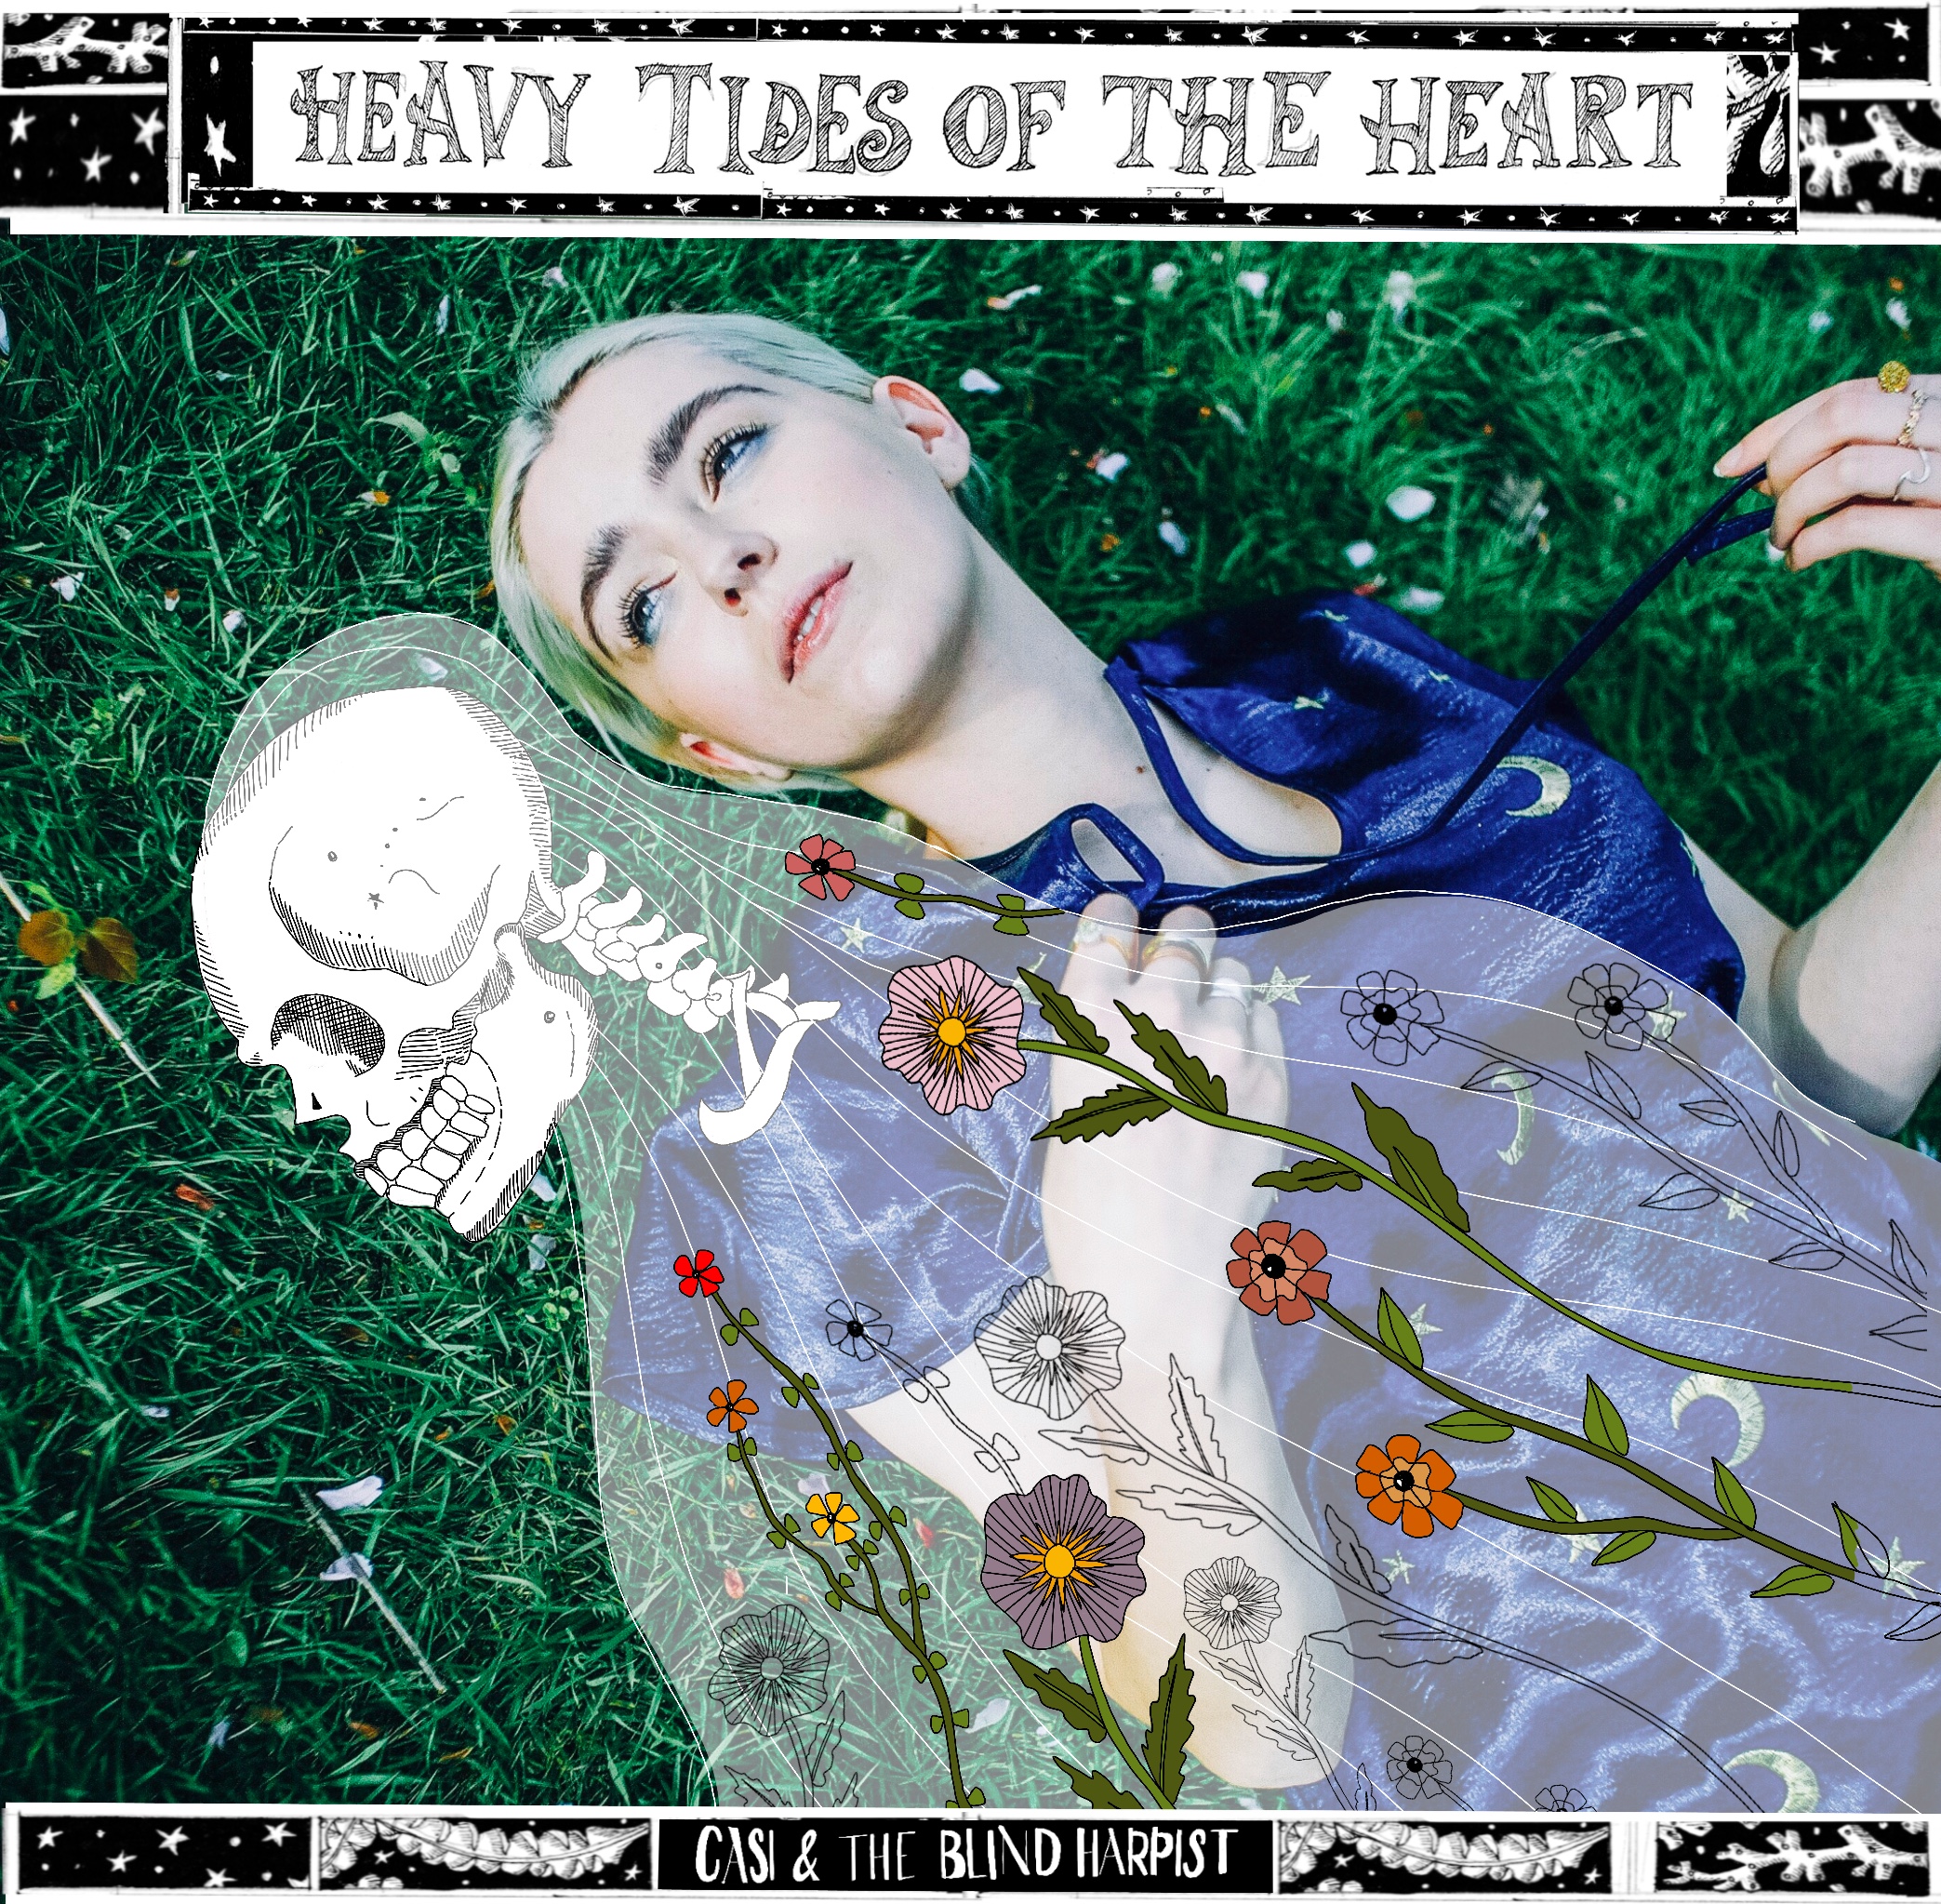 Heavy Tides of the Heart – Casi & The Blind Harpist